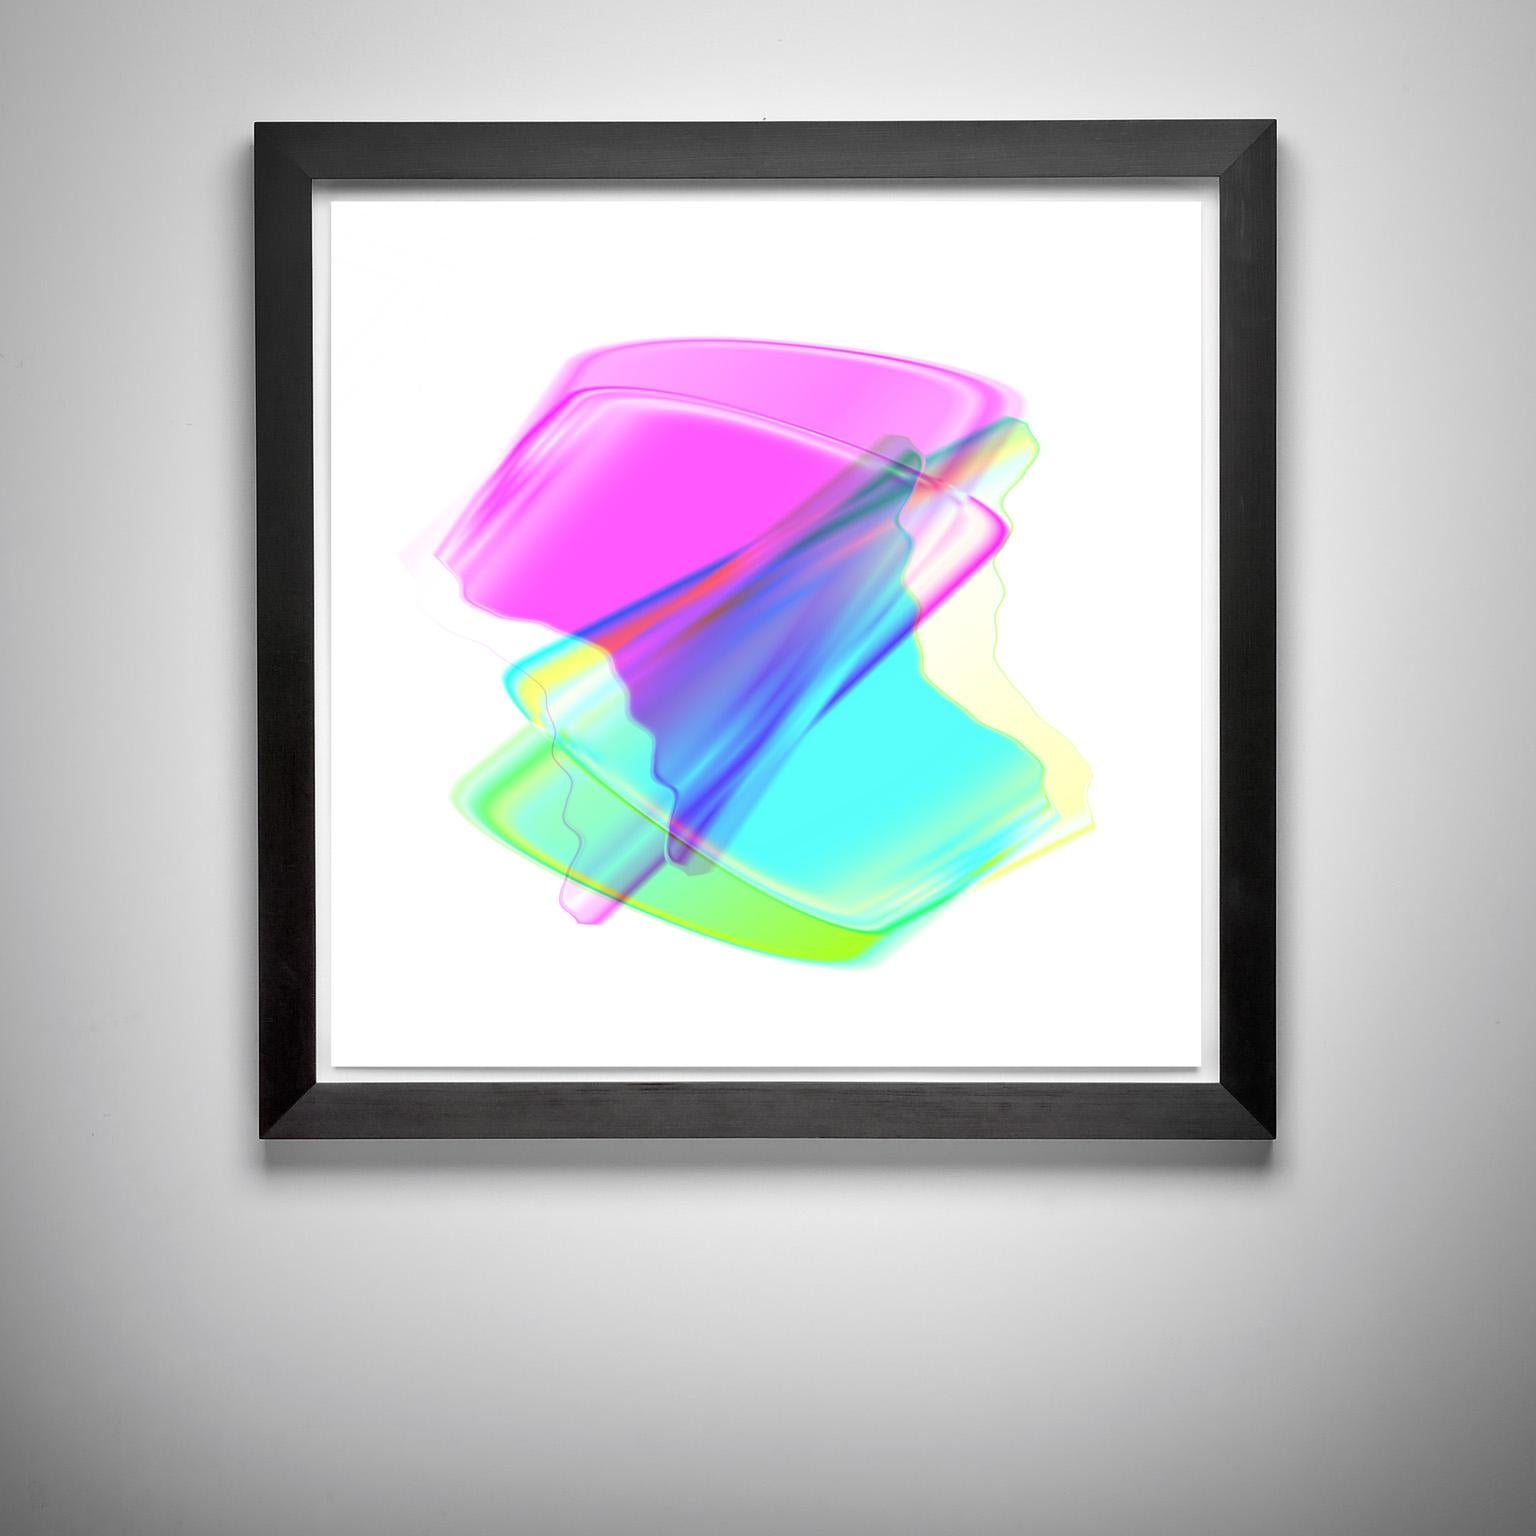 Cells in Bright Pastels_B1, 1/ 100 ed. - Print by Paul-Émile Rioux